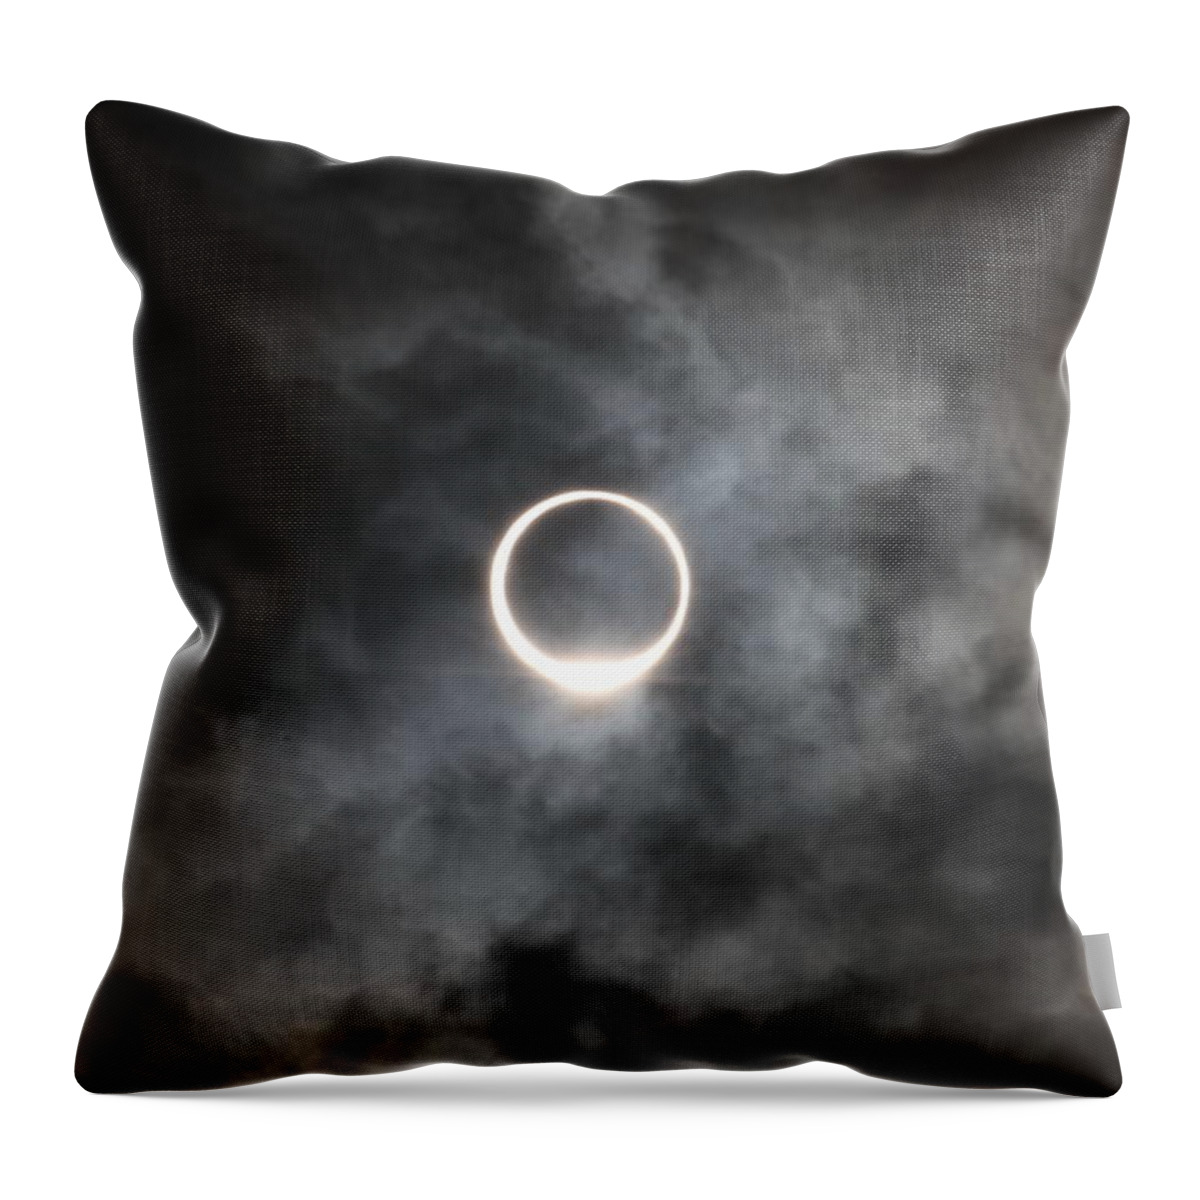 Tranquility Throw Pillow featuring the photograph Eclipse Of The Sun Like Ring by Norio Nakayama